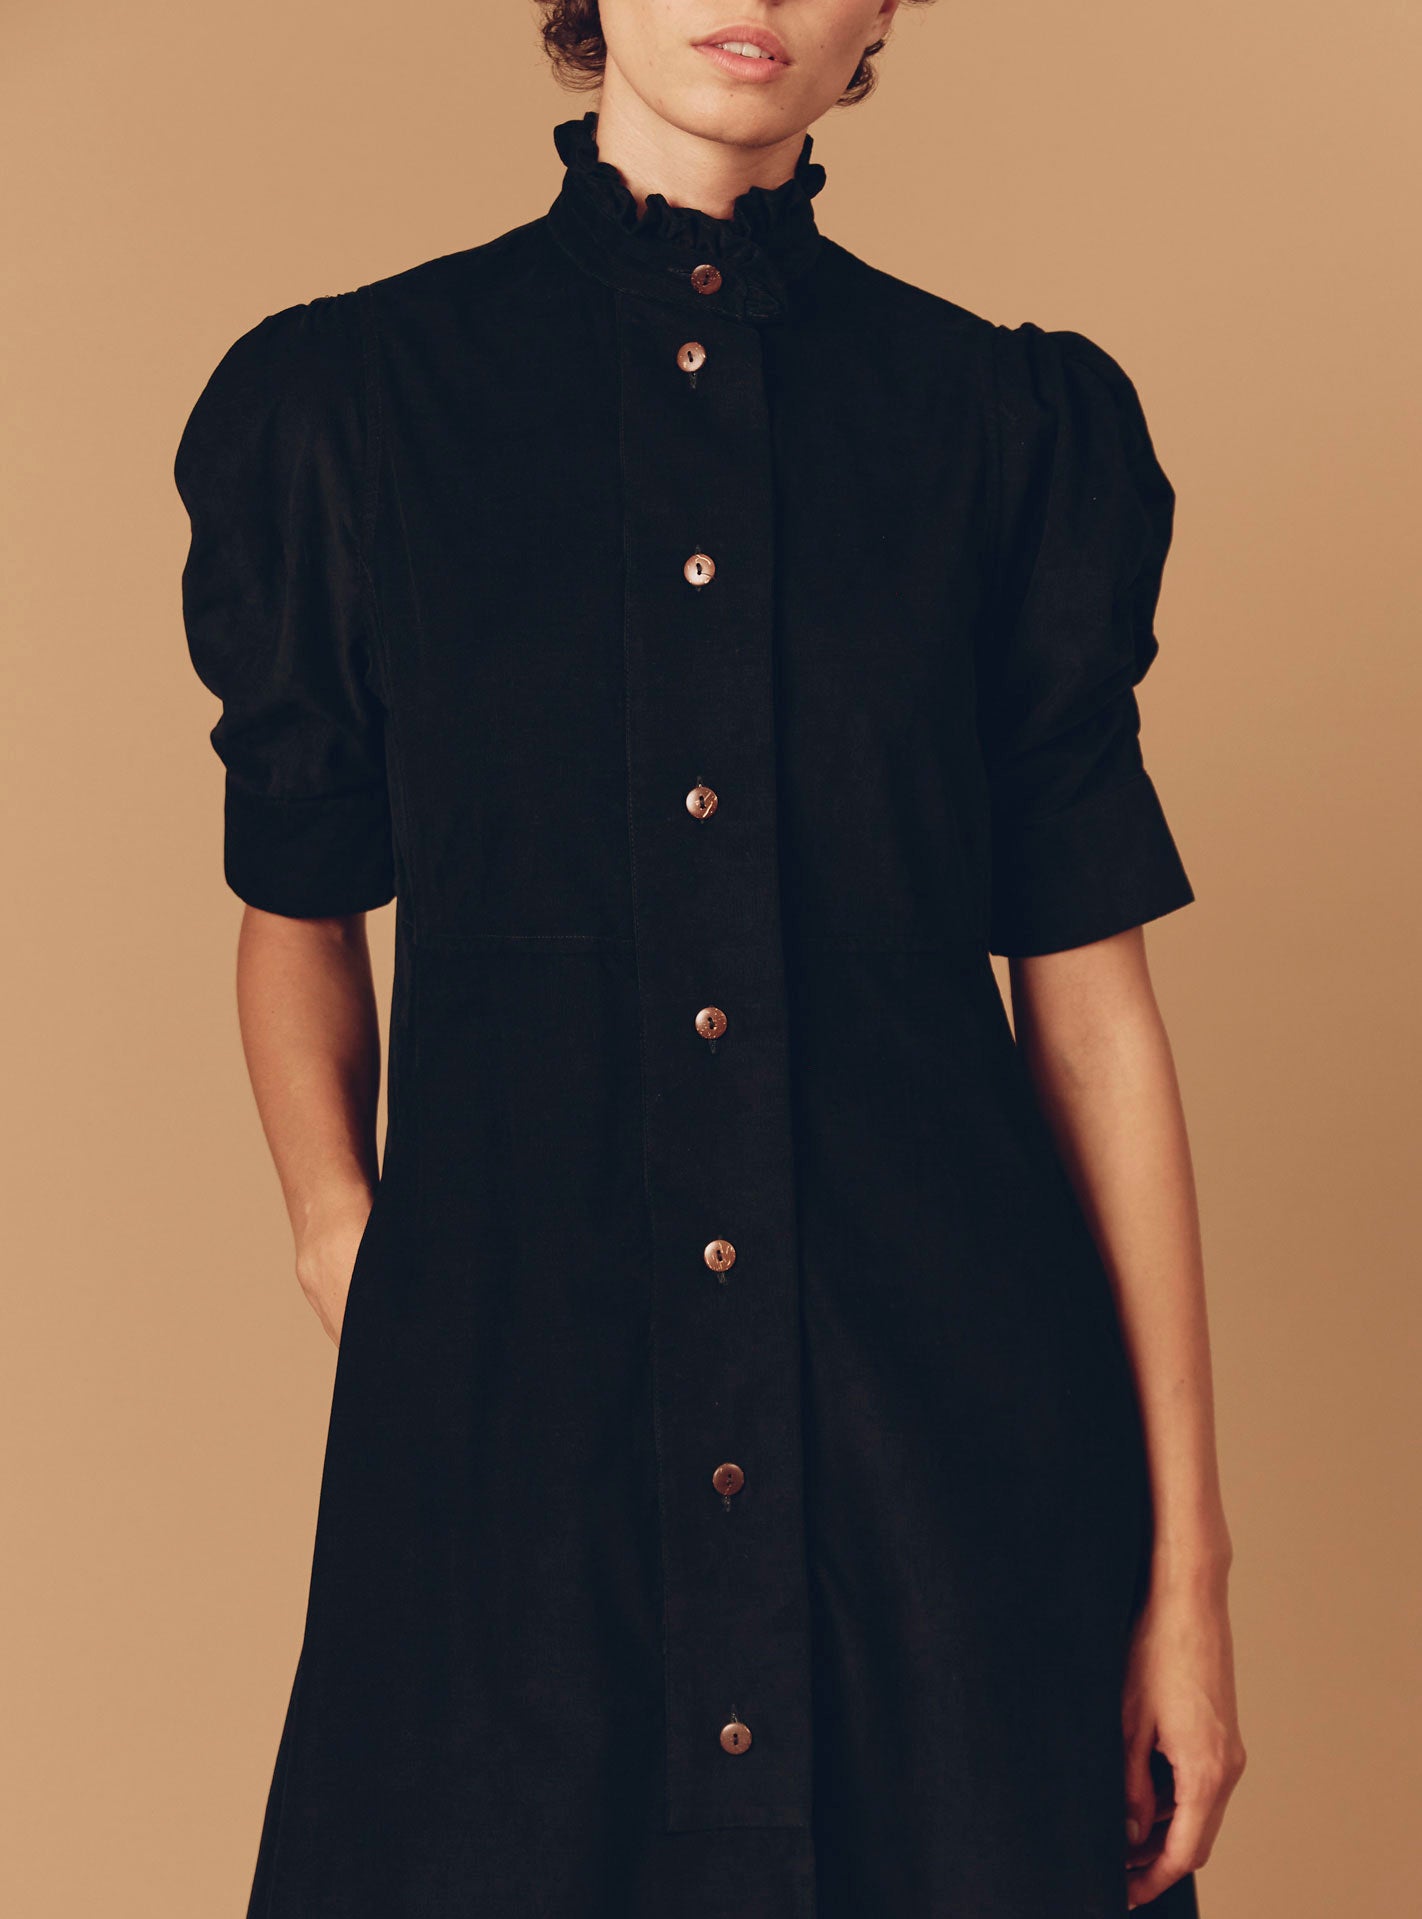 Close up Front view of Venetia Black Plain Corduroy Dress by Thierry Colson